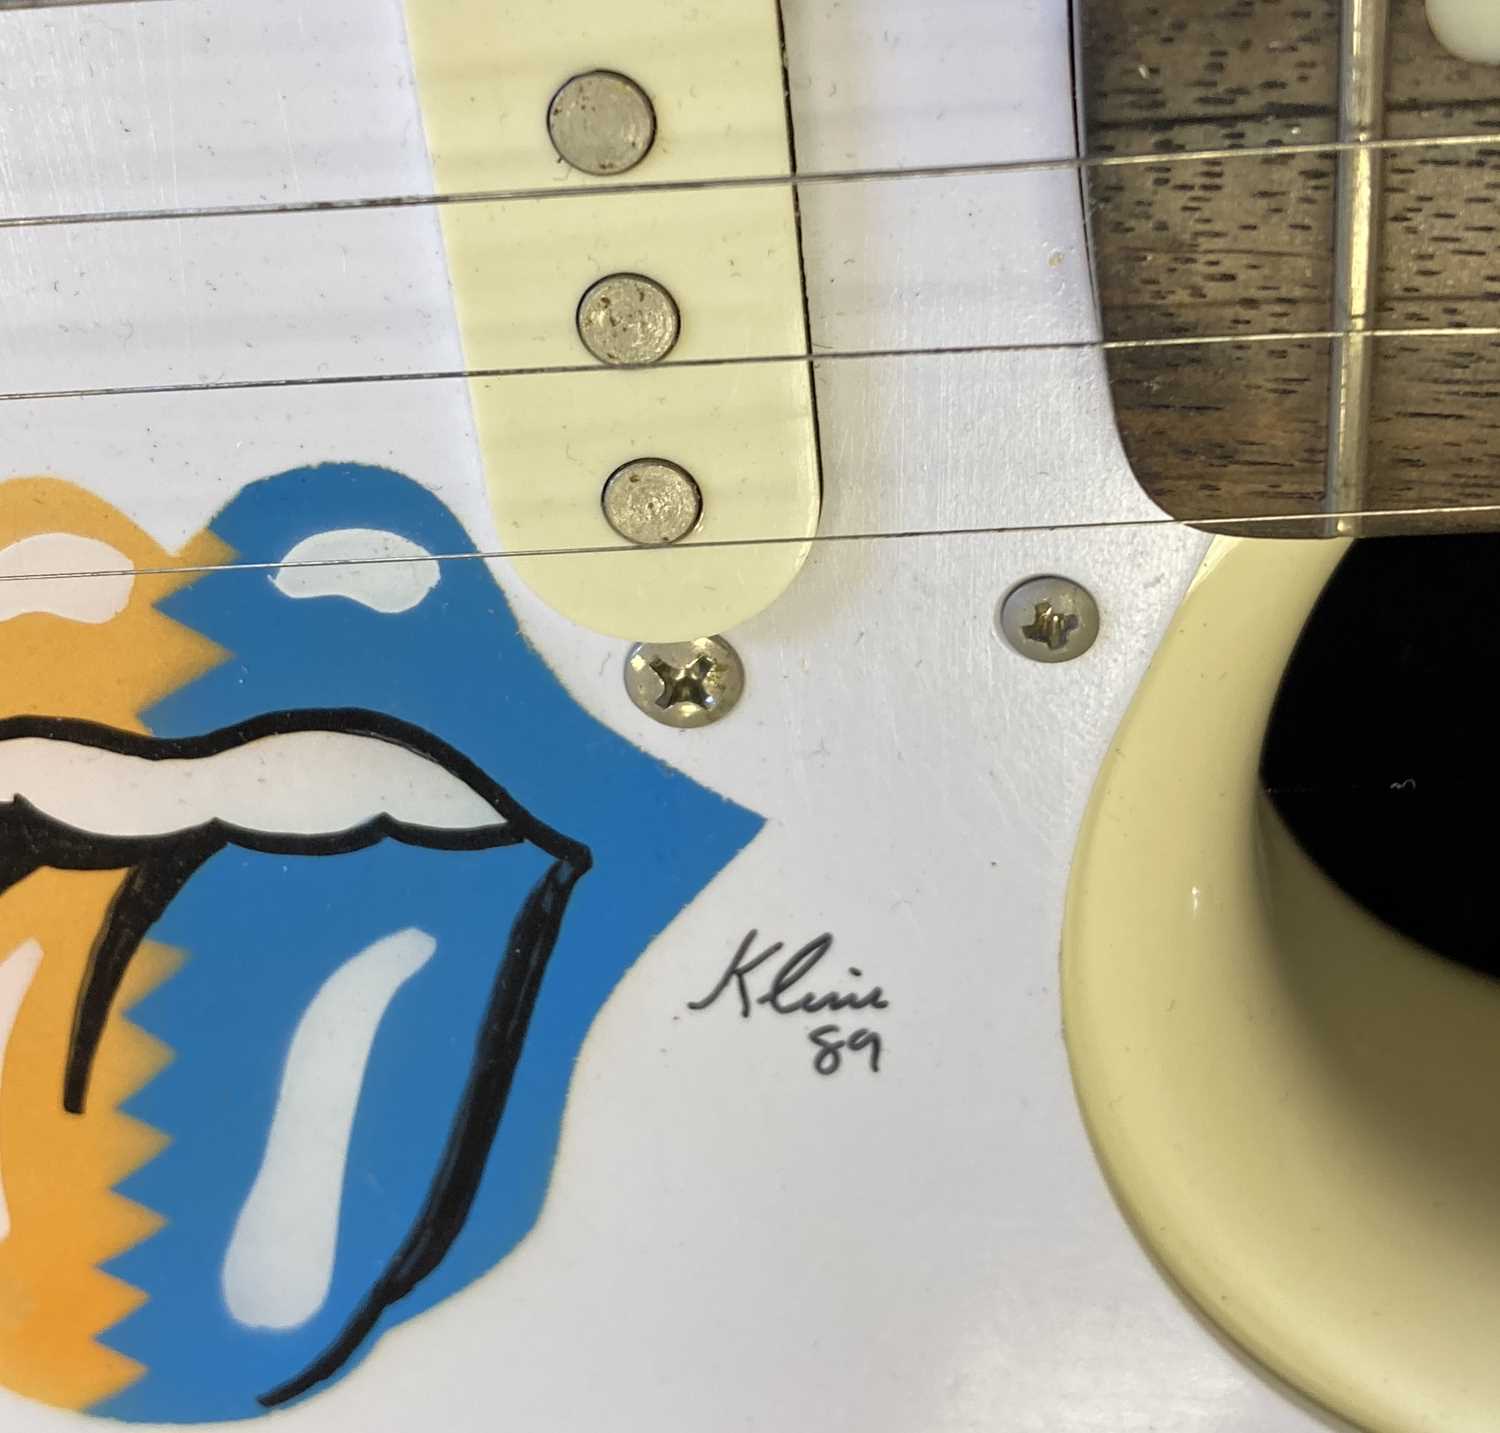 ROLLING STONES LIMITED EDITION FENDER STRATOCASTER - Image 3 of 8